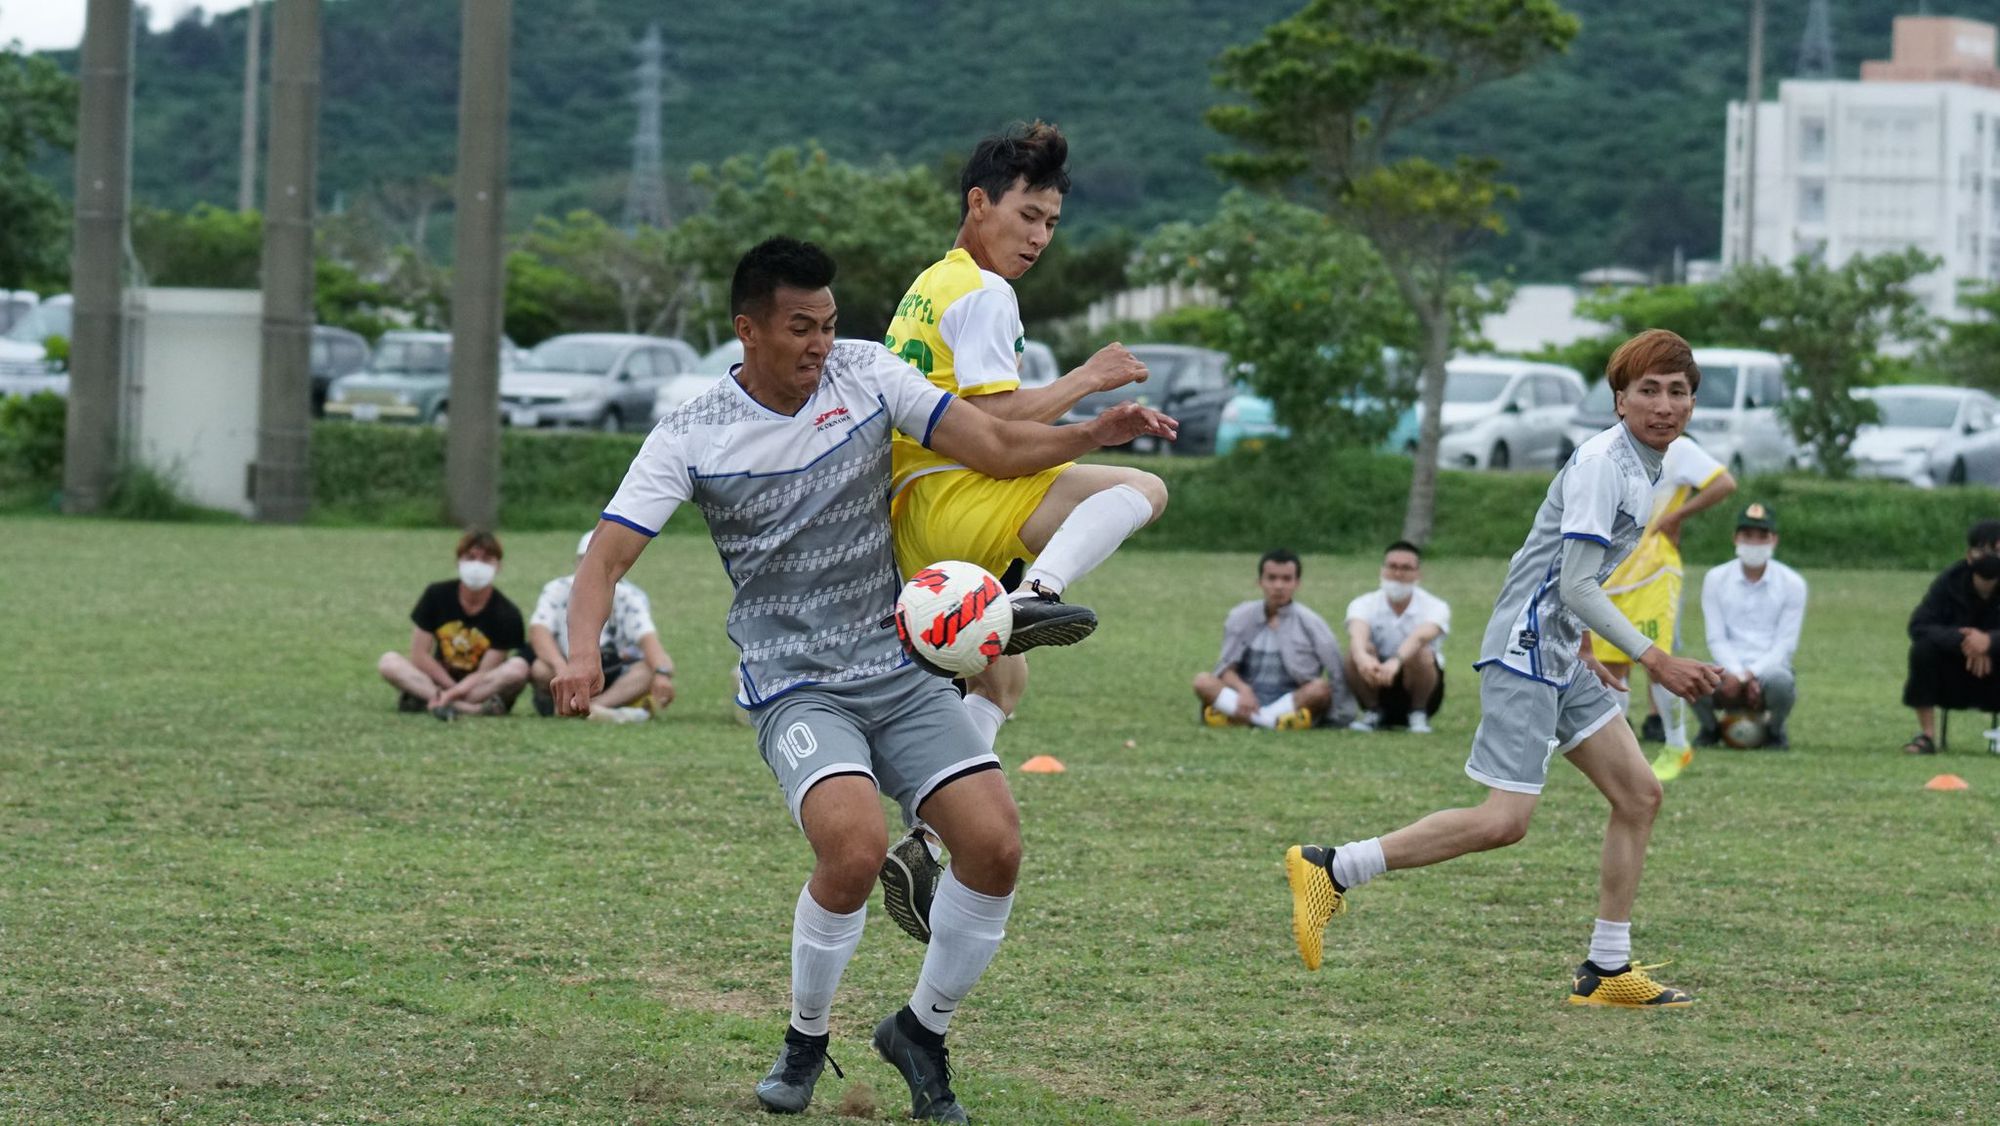 Football exchanges connect the Vietnamese community in Japan - Photo 3.